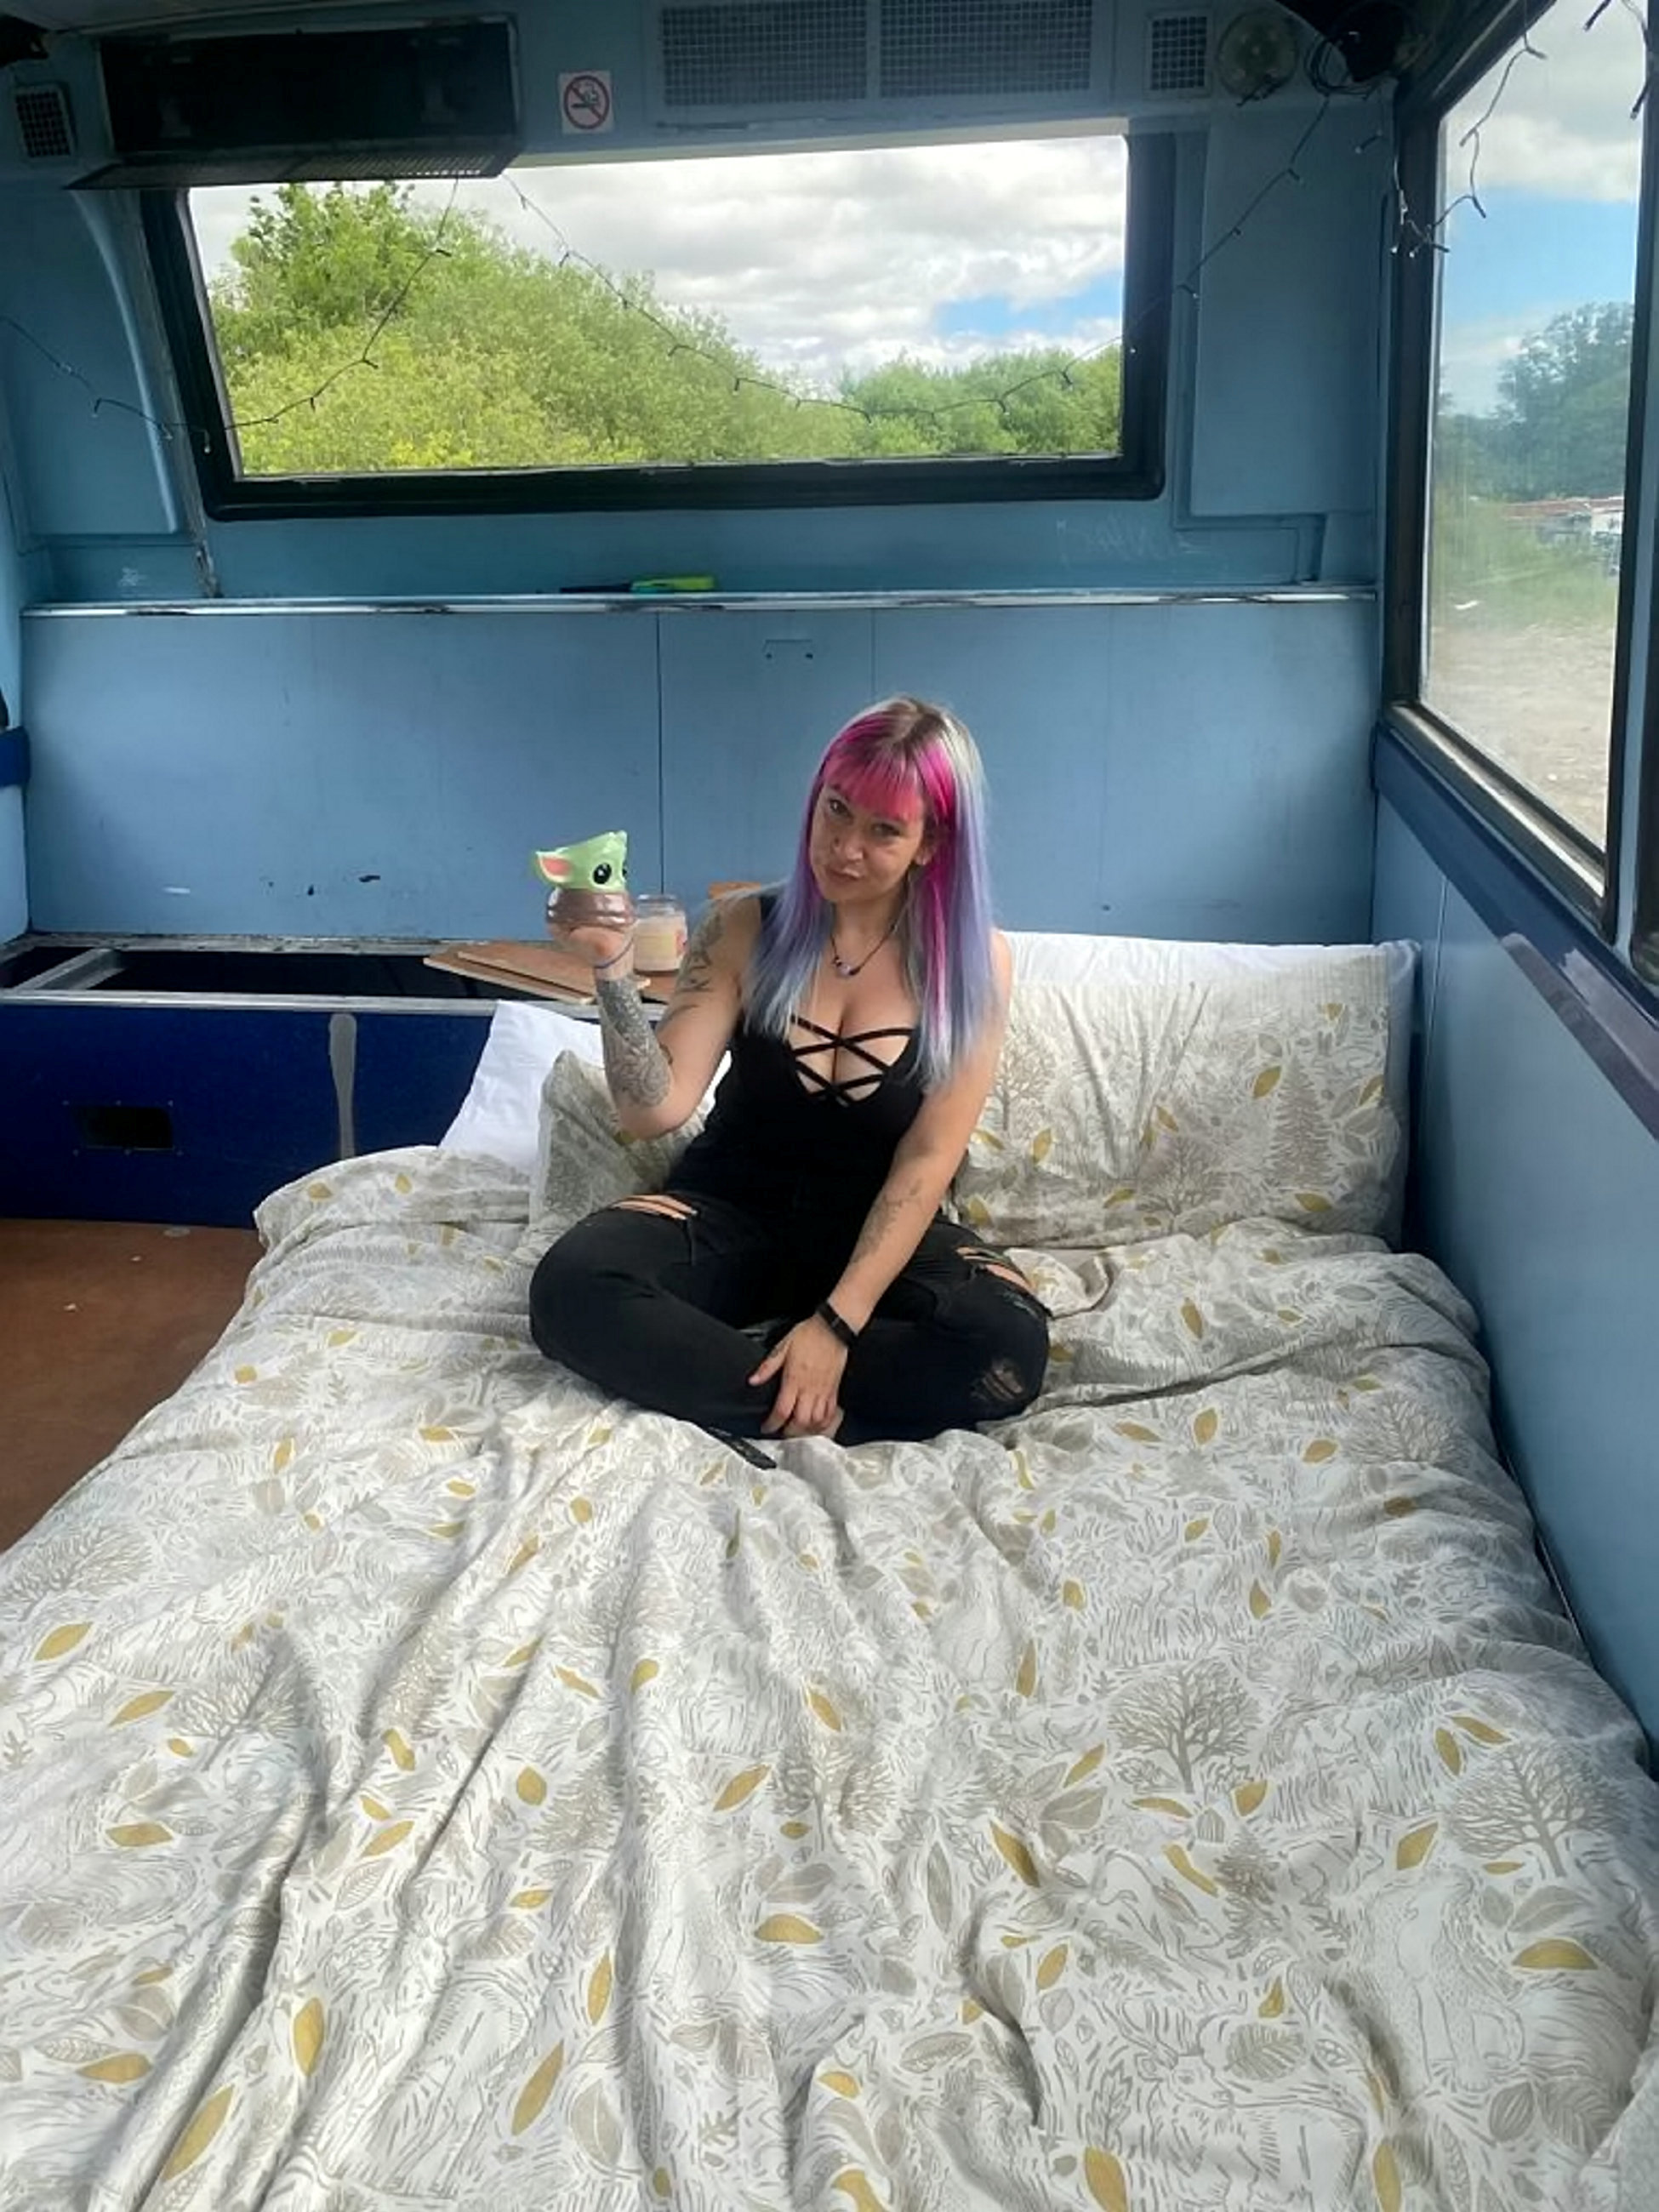 Delivery driver Hayley Rowson, 28, bought the bus in April 2021 and is devoting all her free time to make it a comfortable, drivable home. 